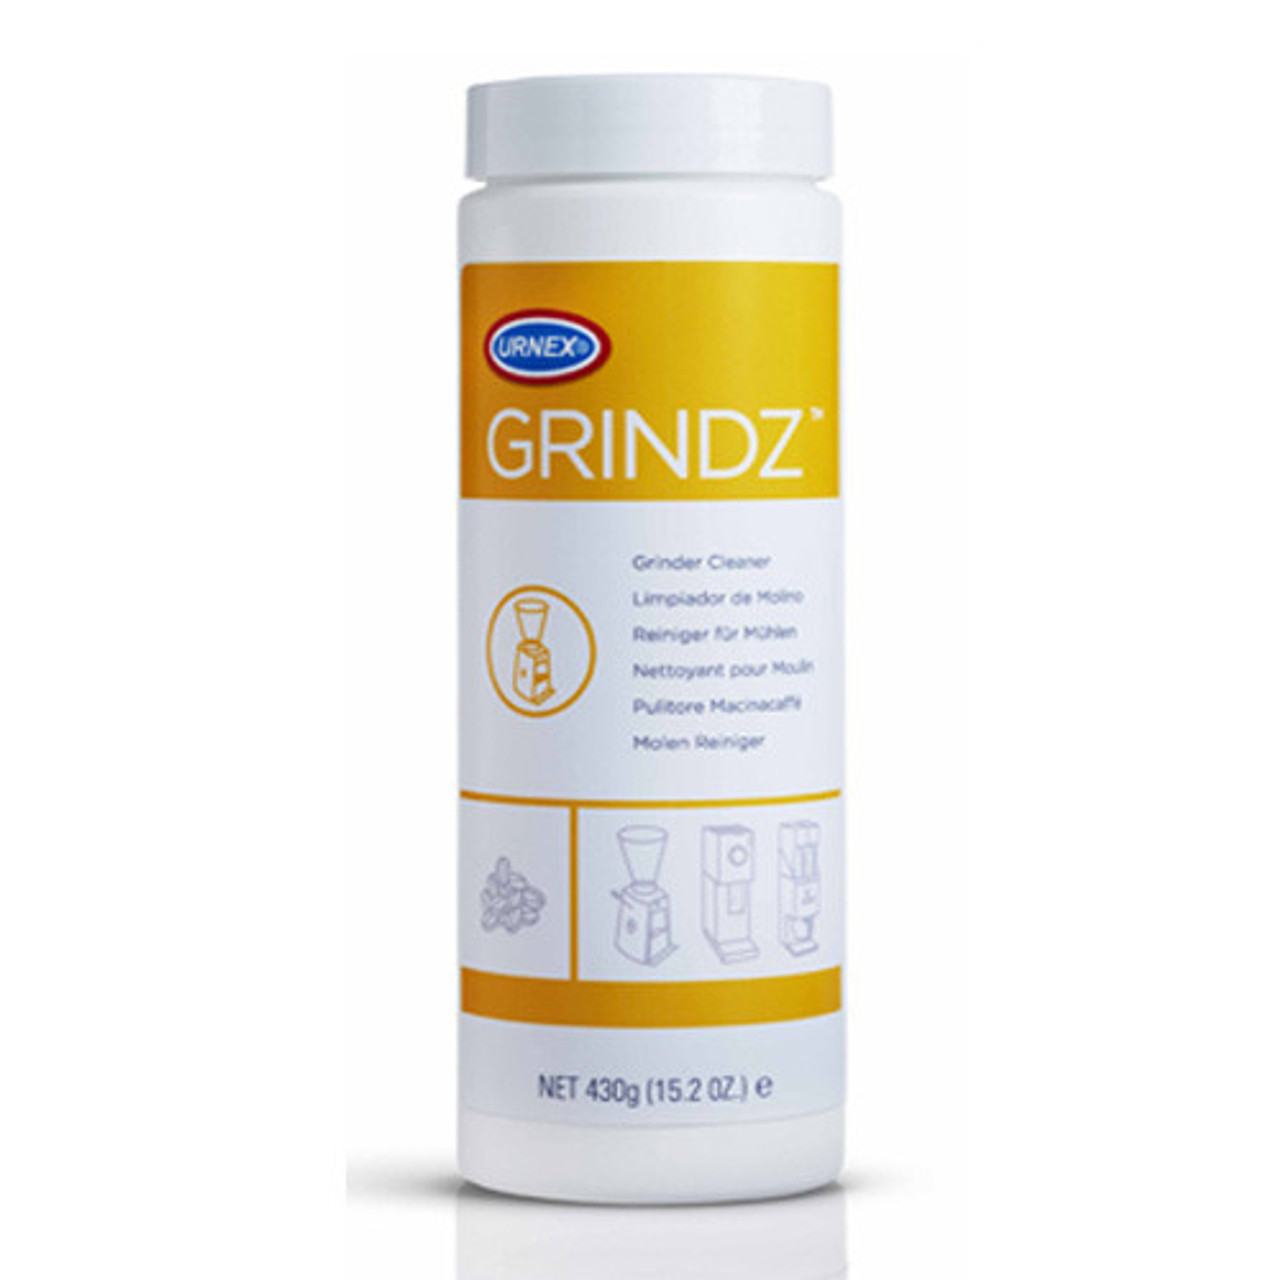 Using Grindz to Clean Your Grinder